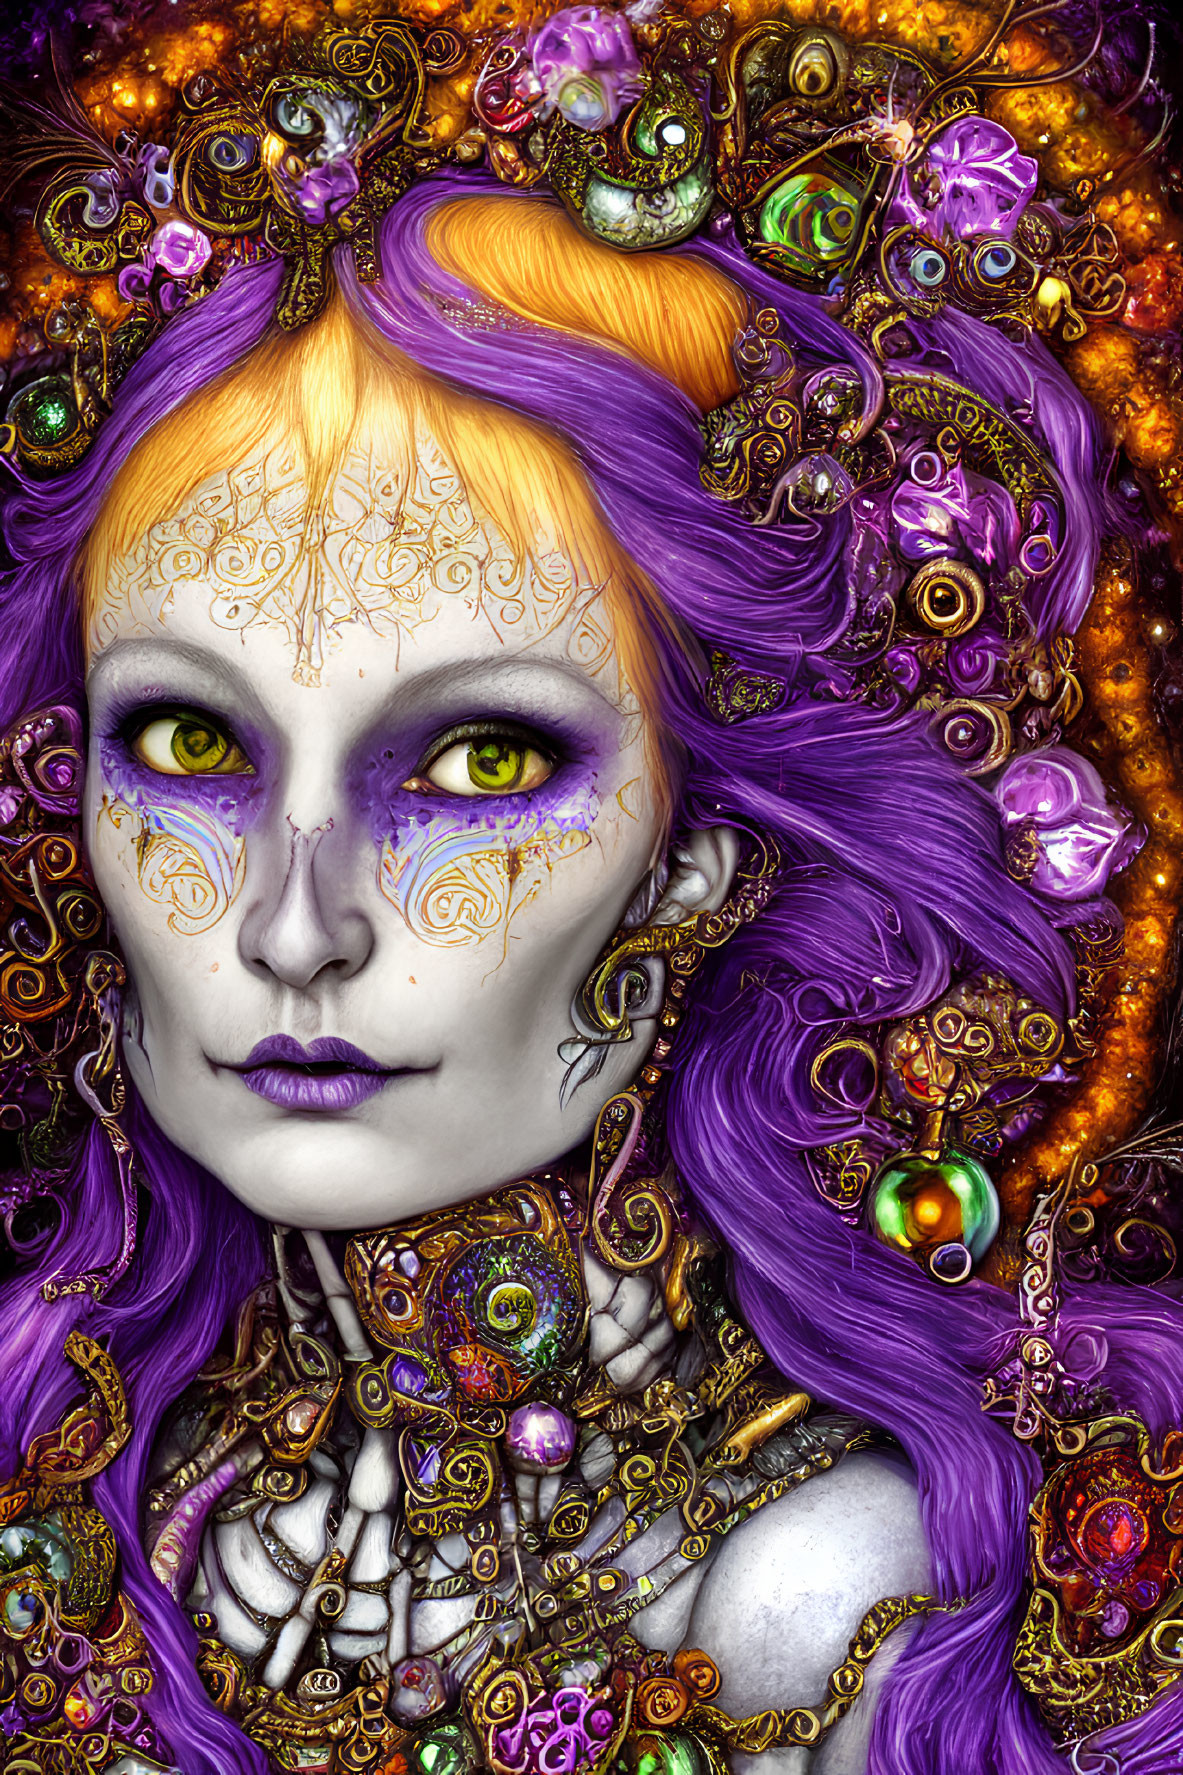 Colorful portrait of a woman with purple hair and gold face markings